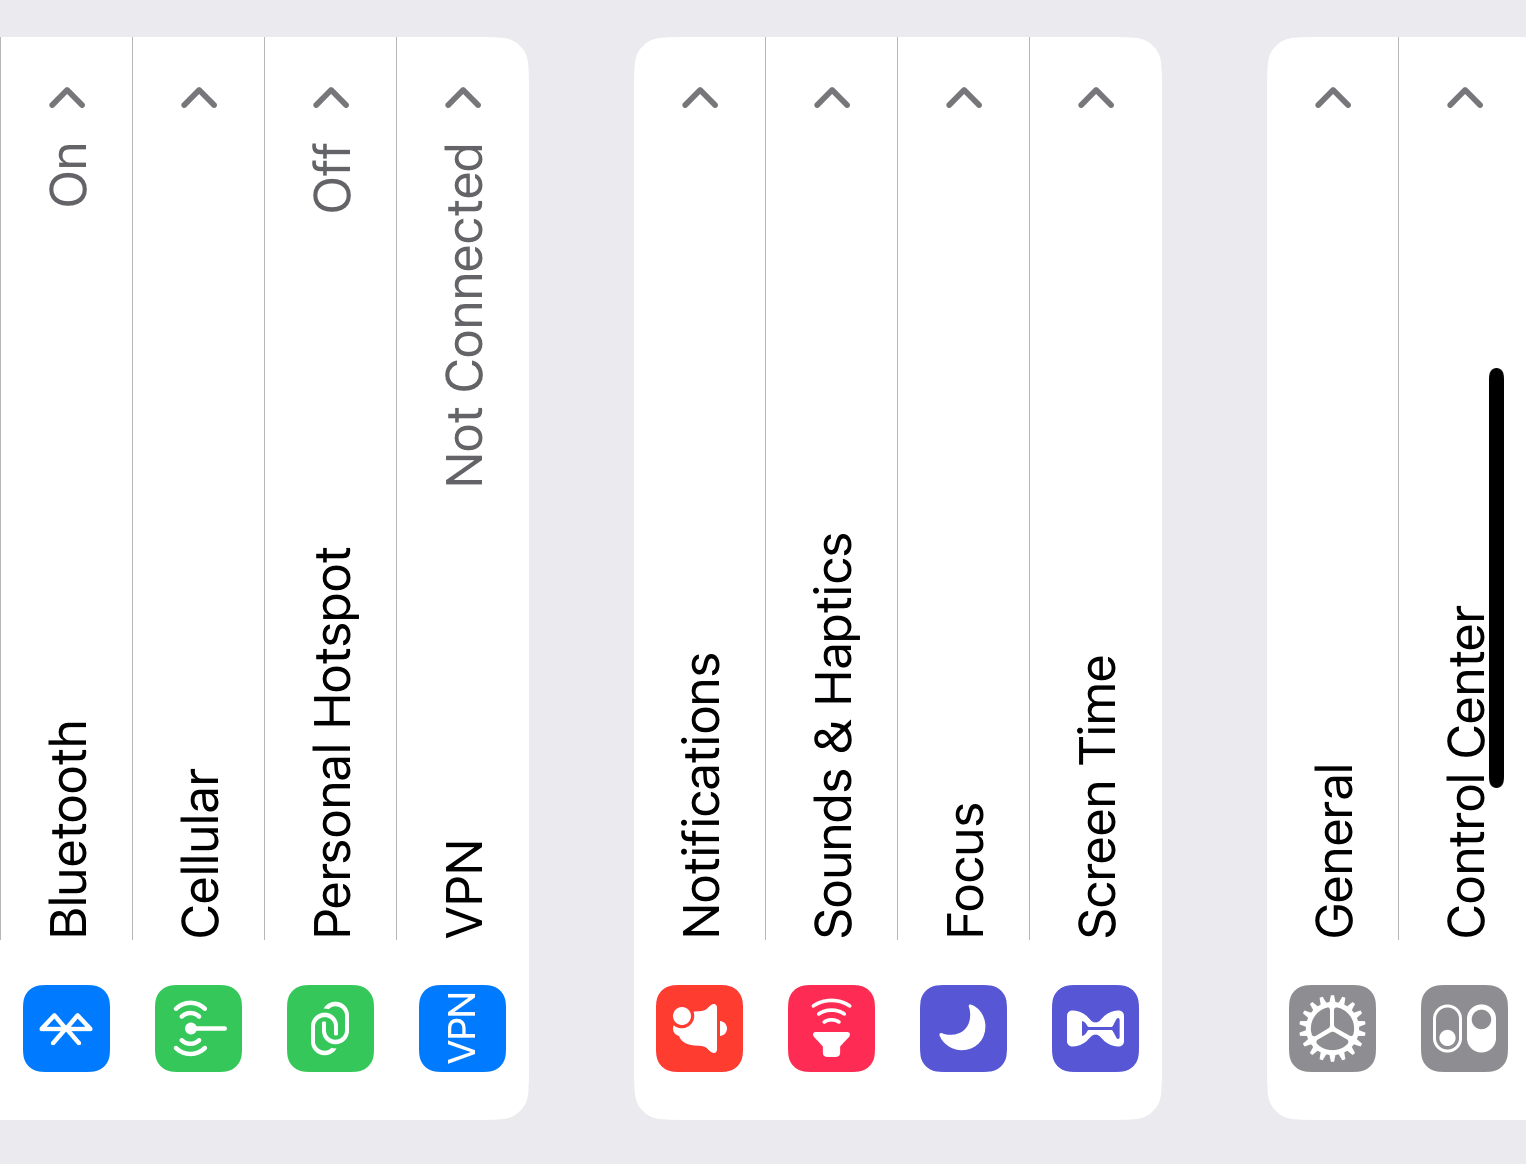 The settings menu is horizontal to show landscape, with menu items rotated 90 degrees to the right